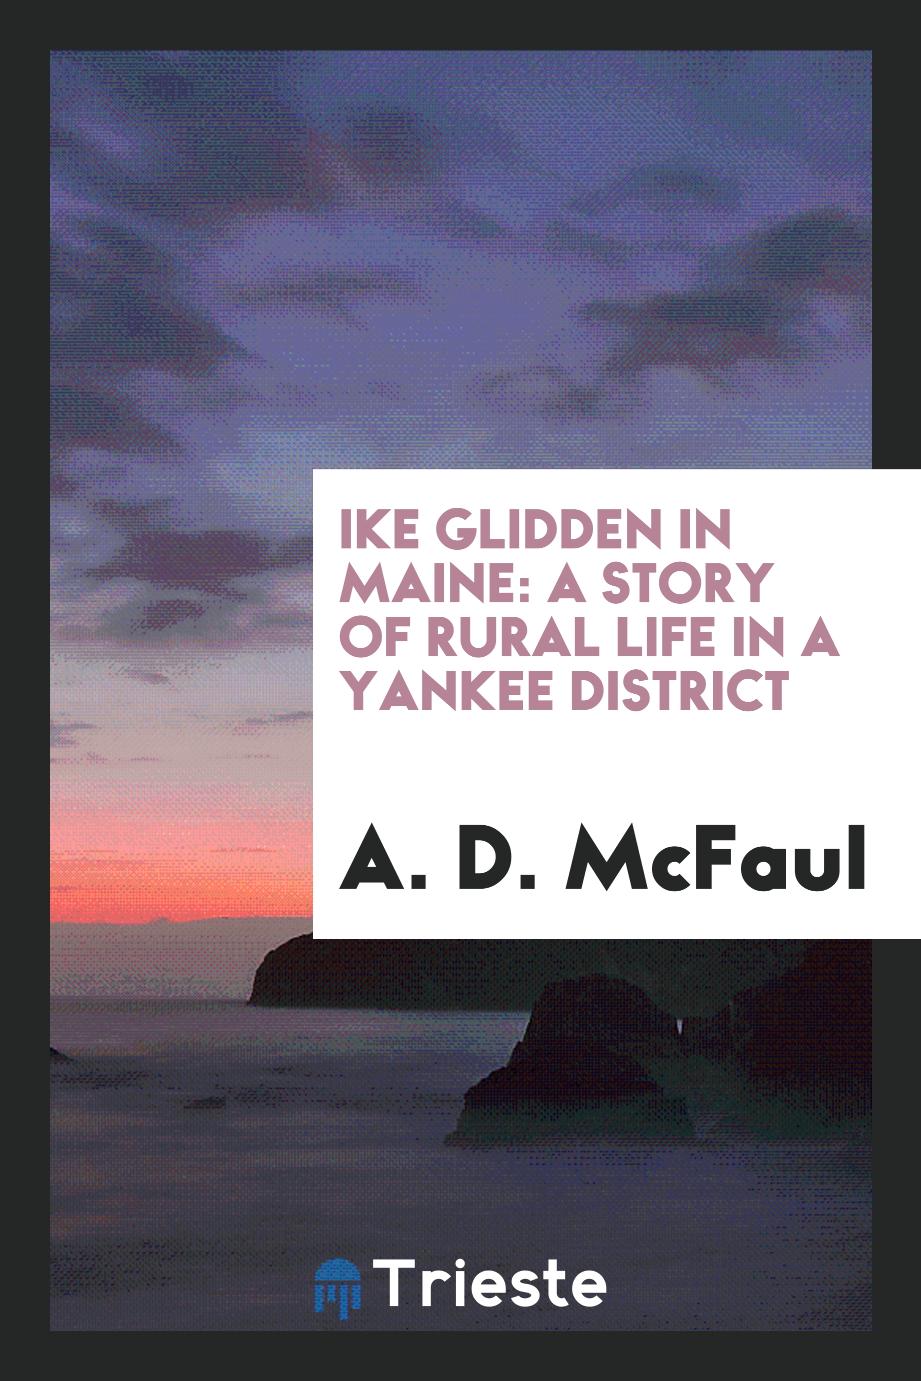 Ike Glidden in Maine: A Story of Rural Life in a Yankee District